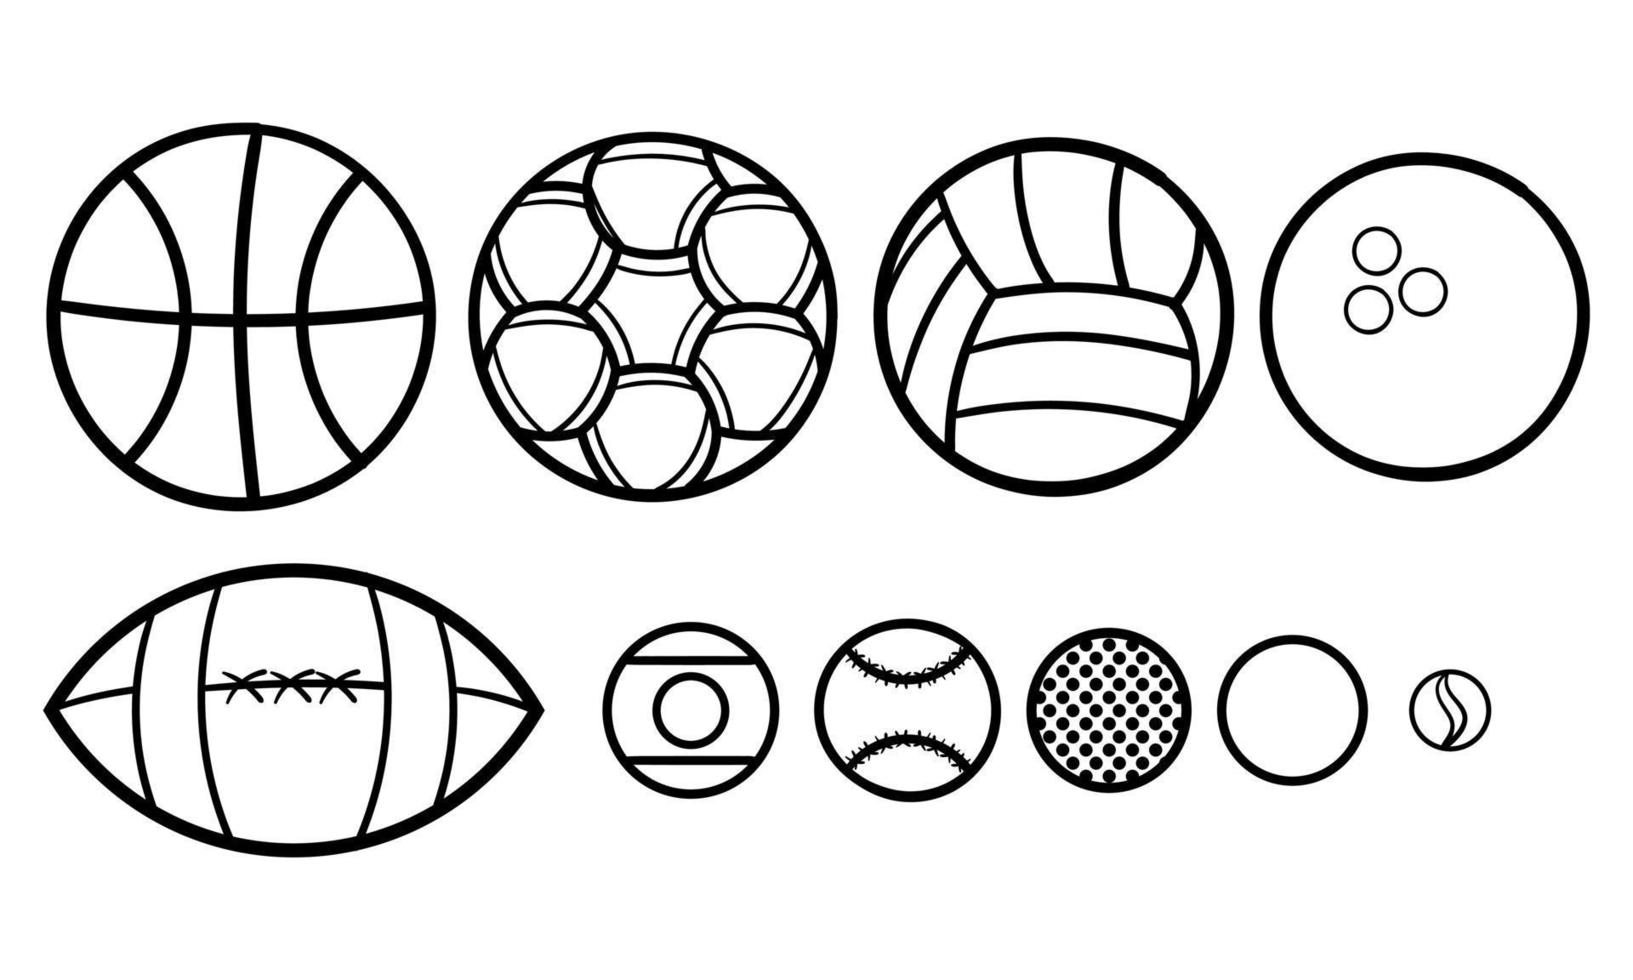 a collection of hand drawn balls vector